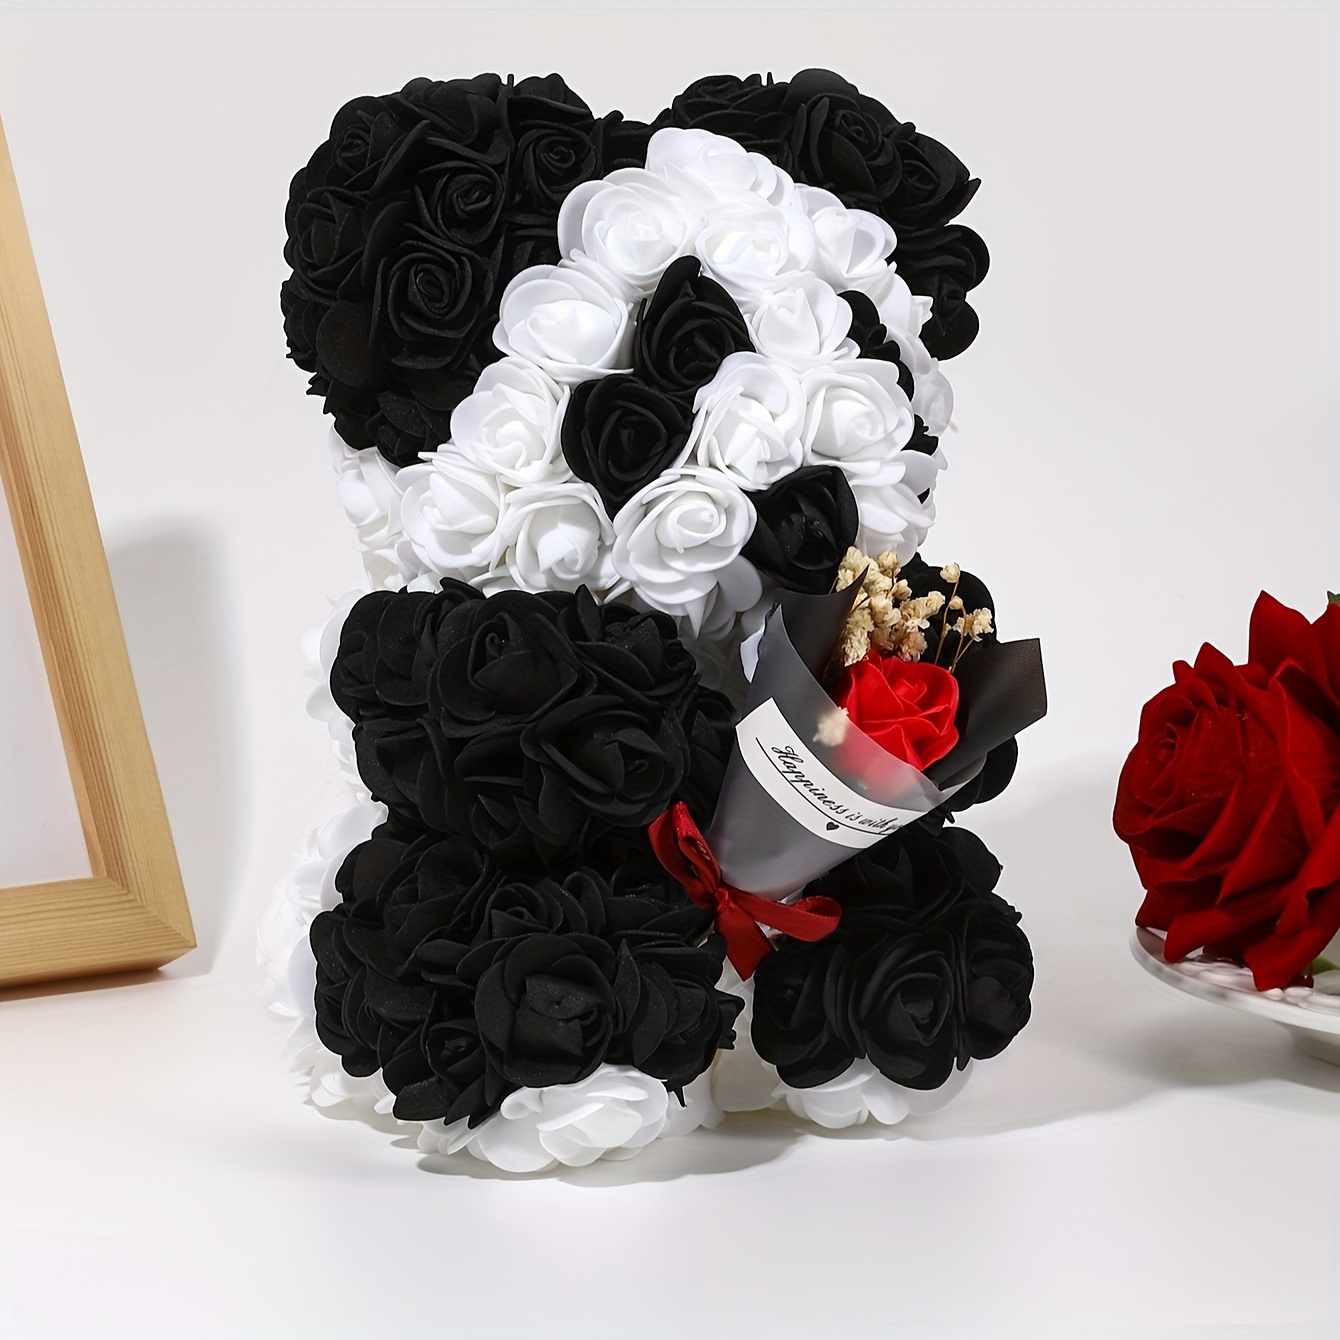 

1pc, Panda Ornament, Creative Gift Decoration For New Year, Wedding, Valentine's Day, With Romantic Roses And Cute Panda Ornaments